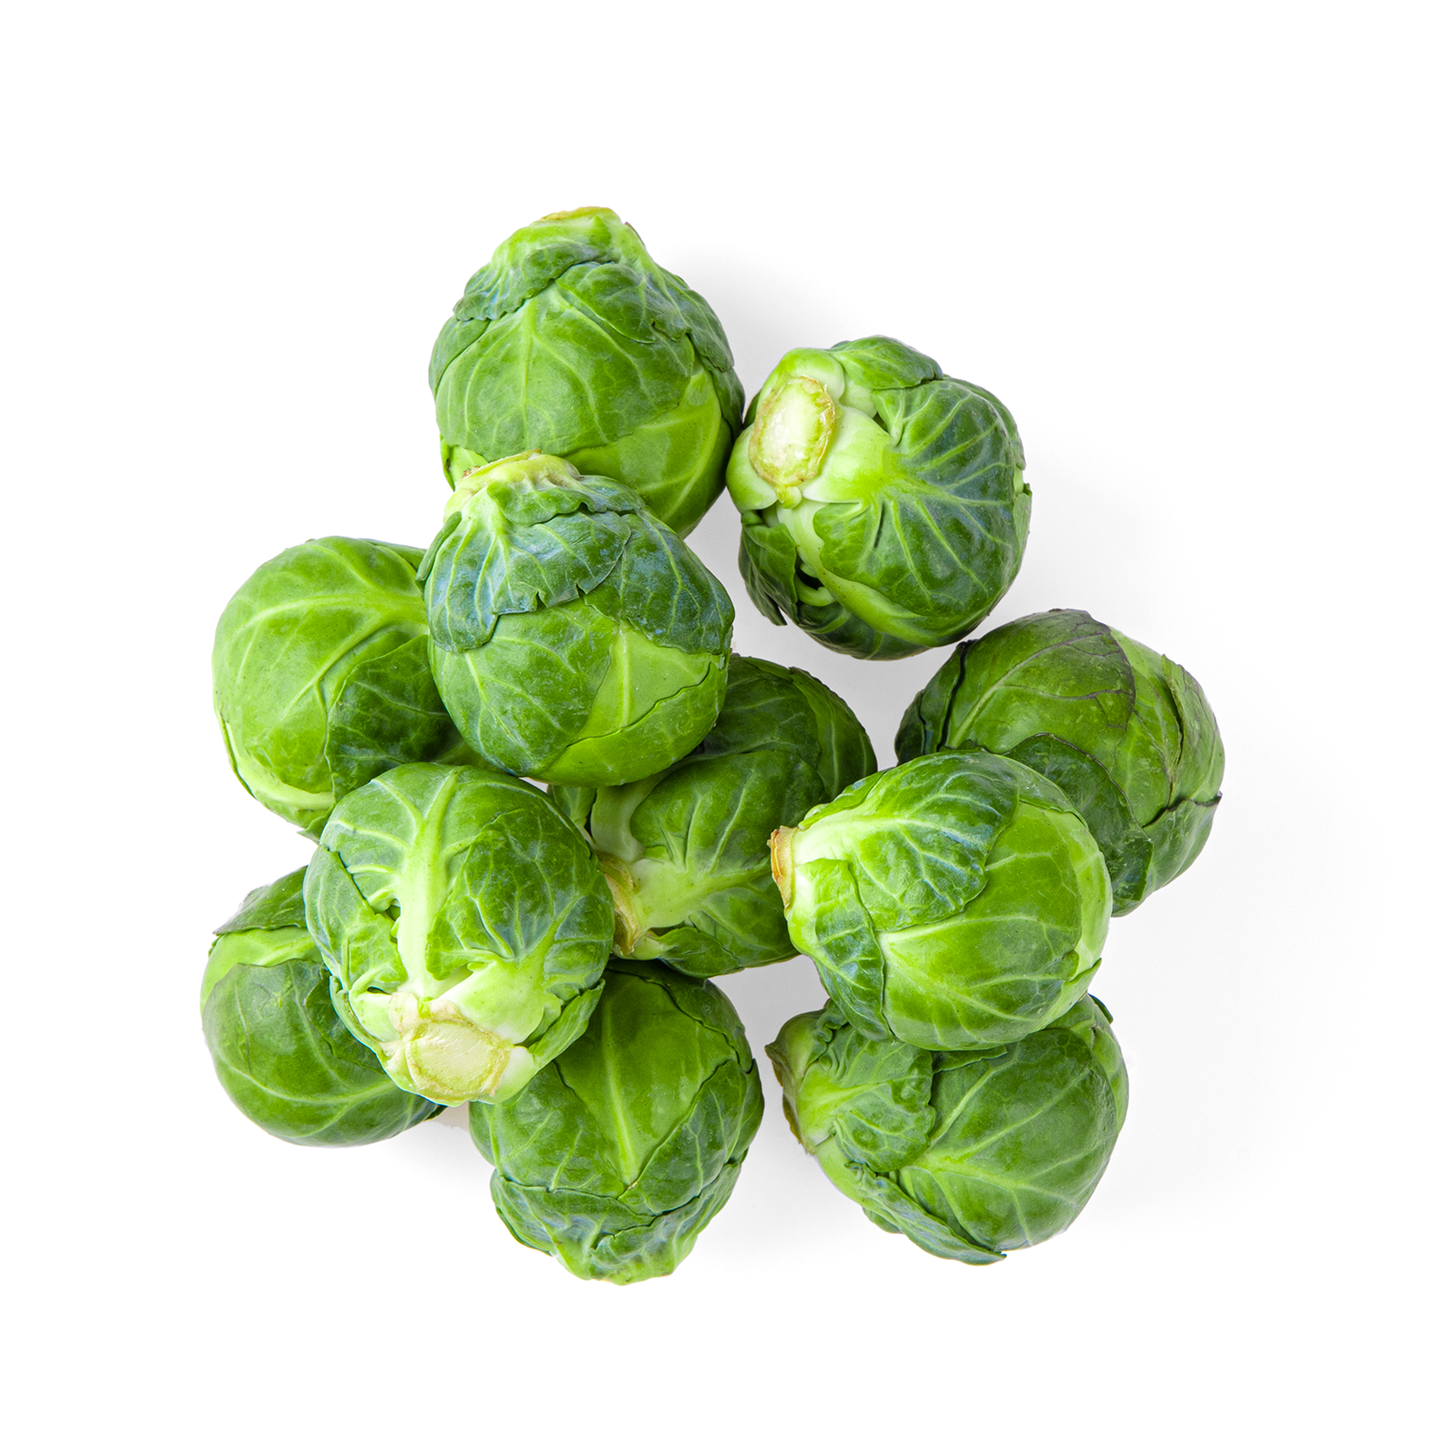 Brussels Sprouts / 1 lb